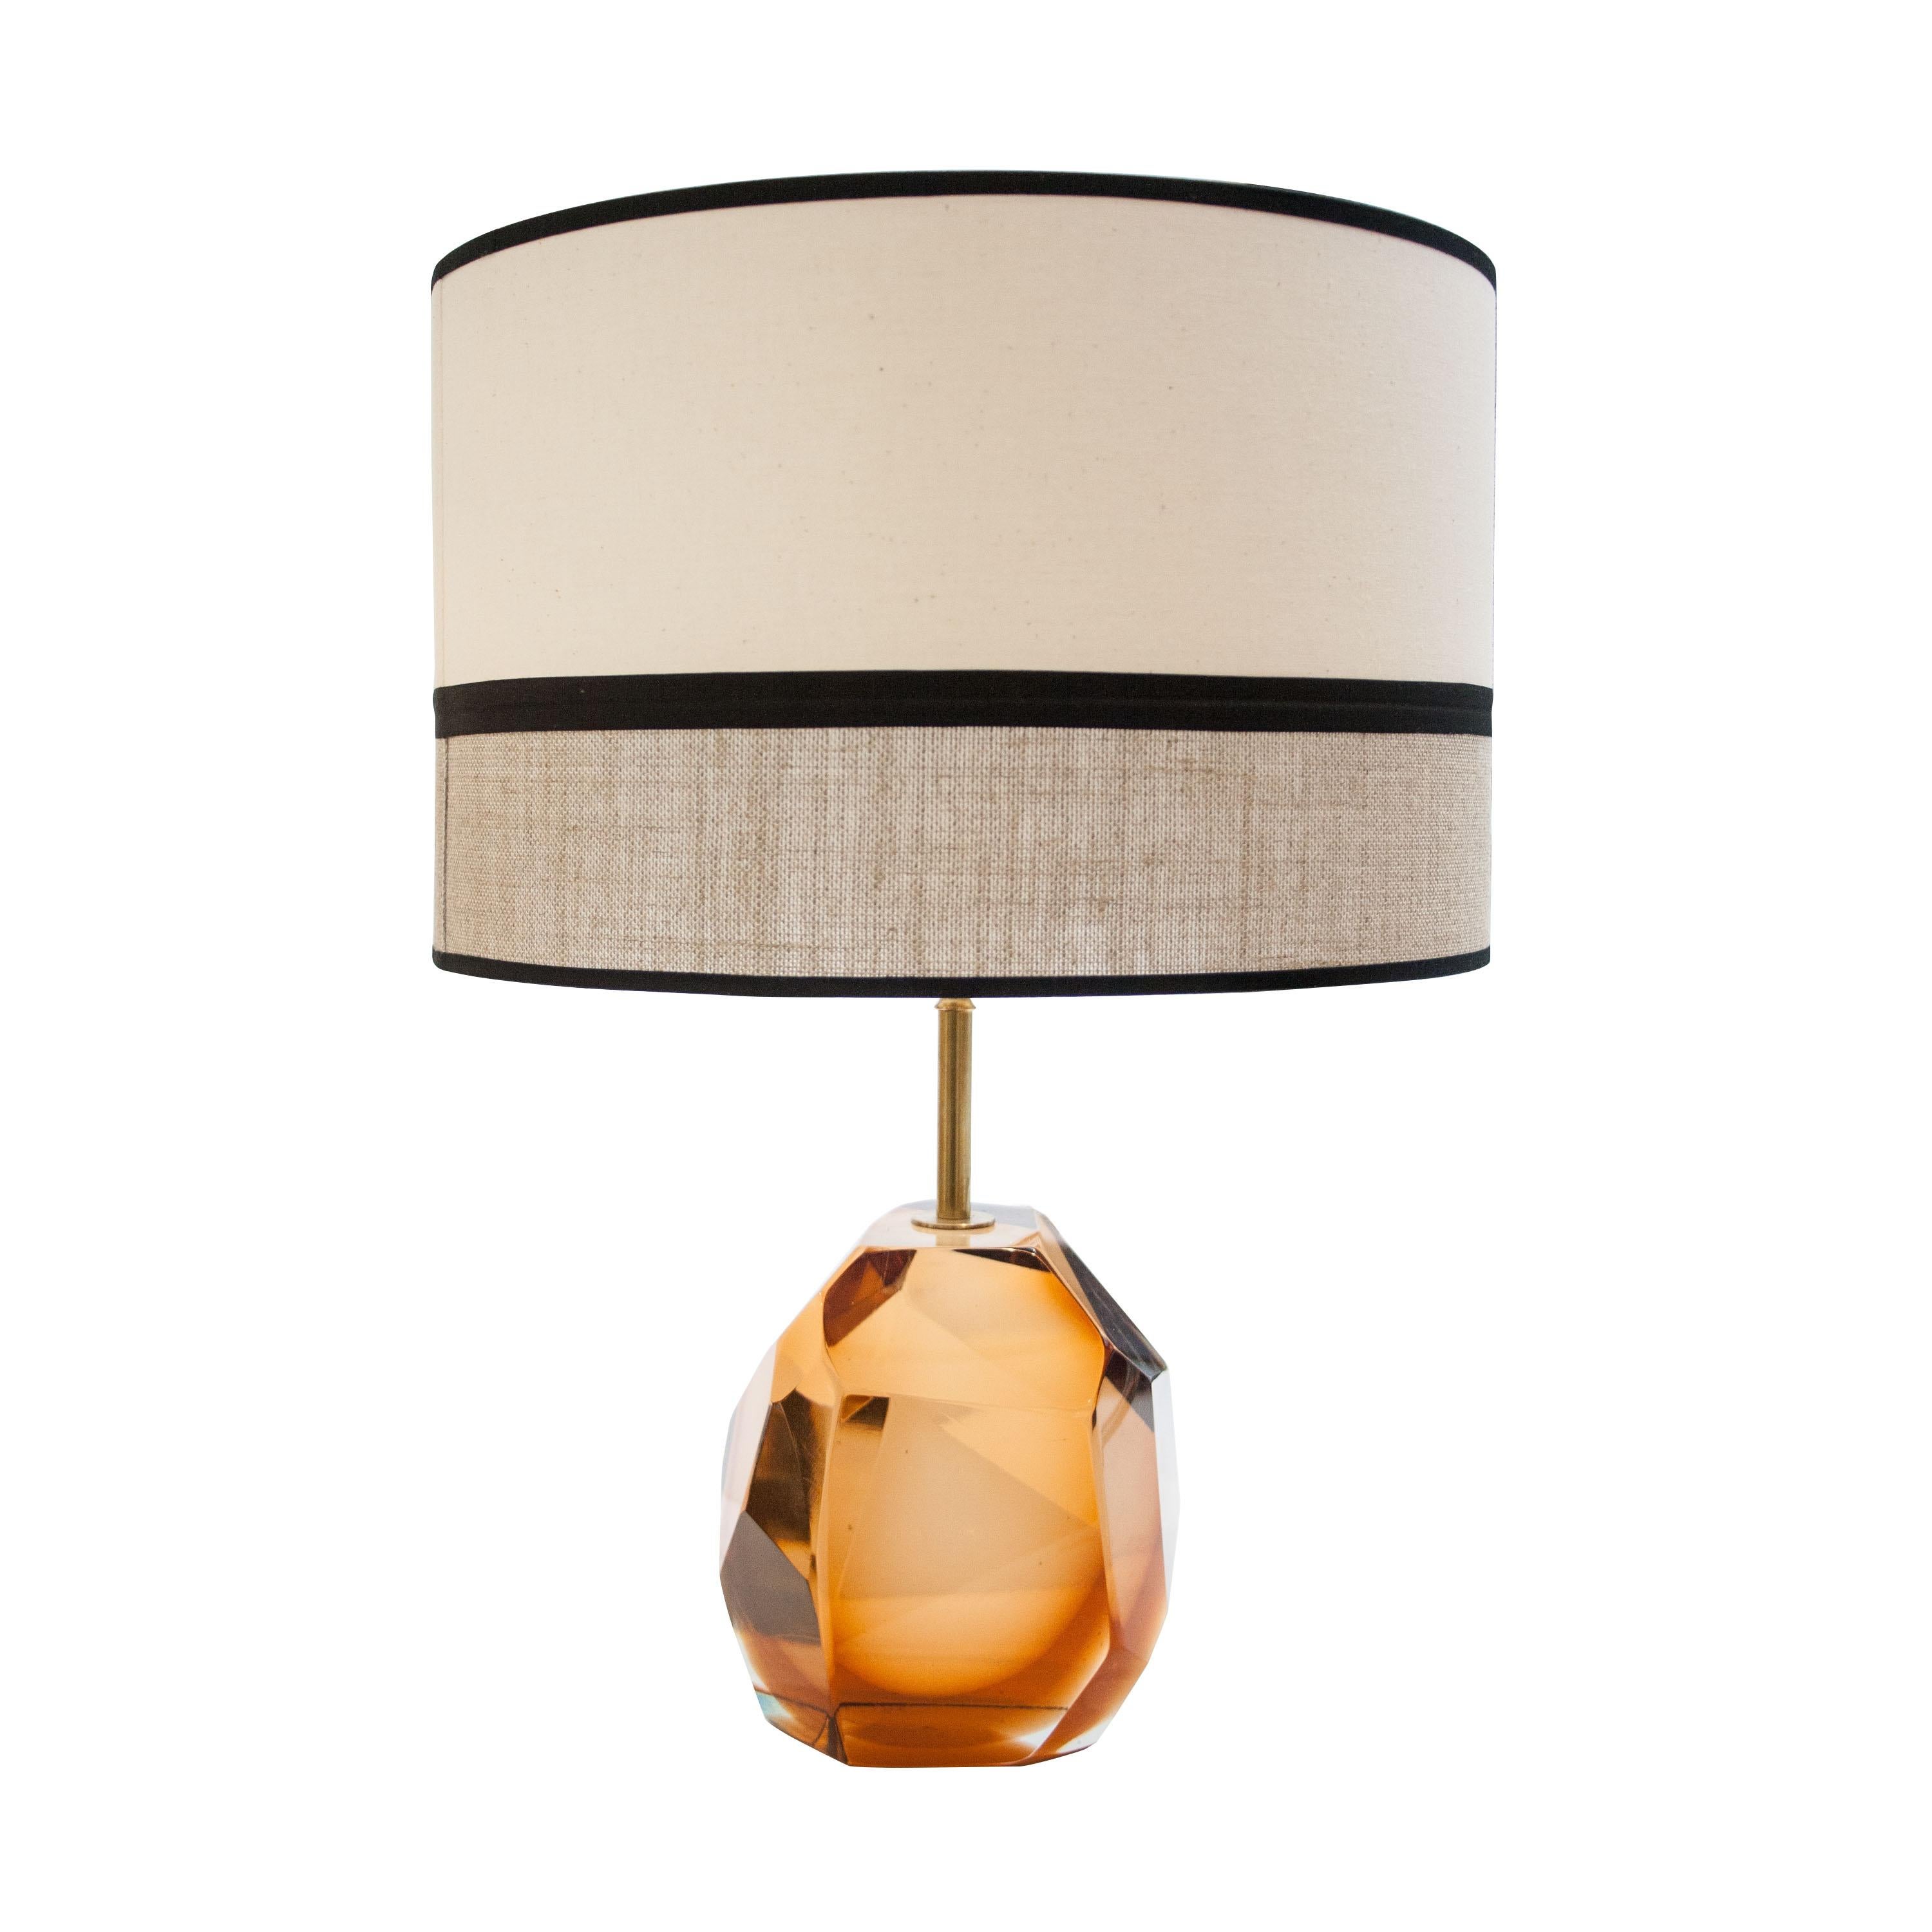 Pair of handmade table lamps made of orange Murano faceted glass in translucent orange with brass stem. Handmade lamp shade in black and two tones of beige.